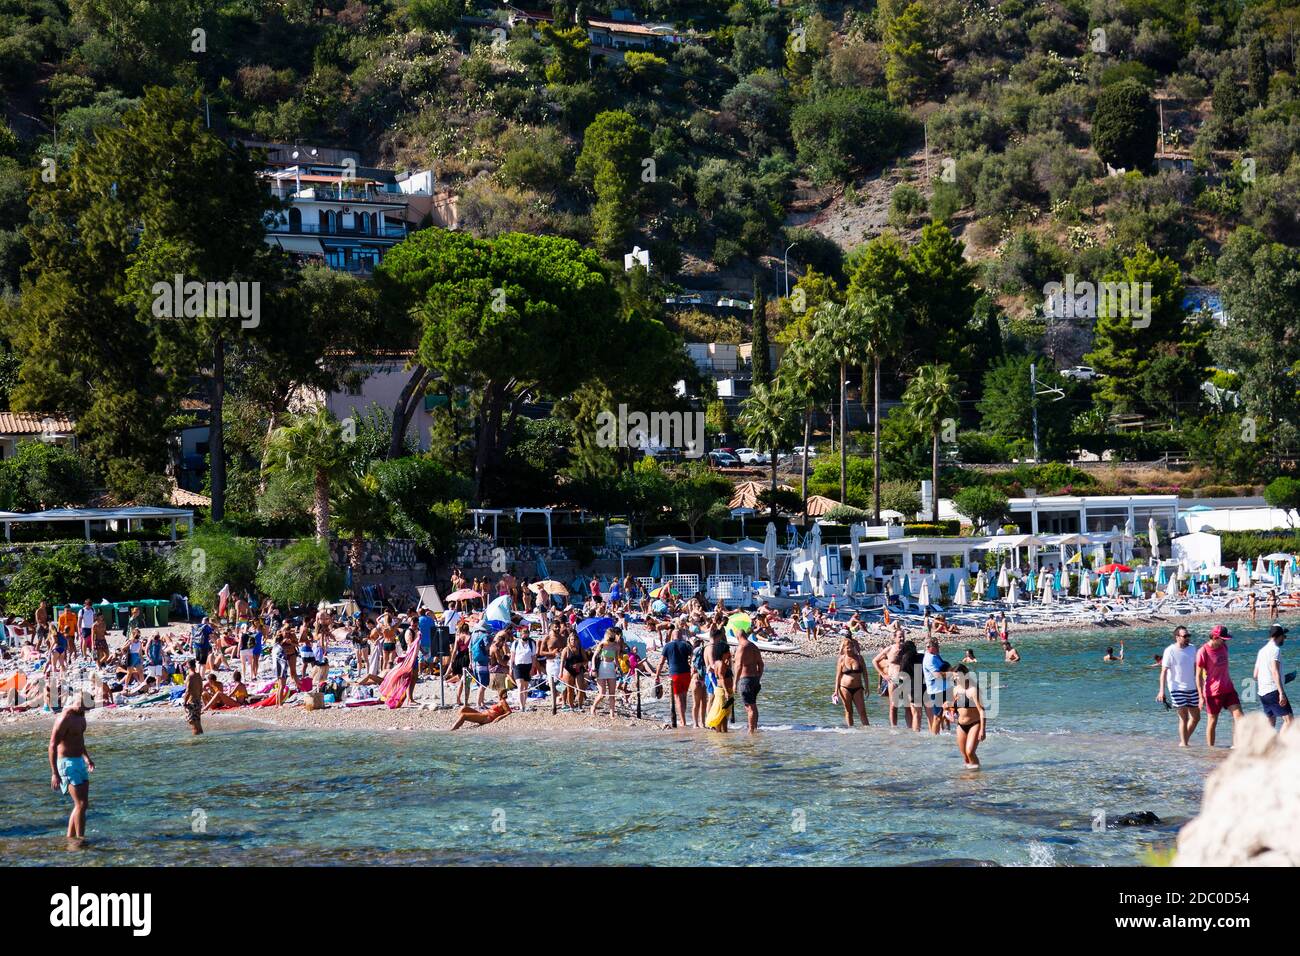 Sicily, Italy. Tourists wade through shallow sea water to reach the Isola Bella tourist attraction near the Sicilian town of Taormina. Stock Photo